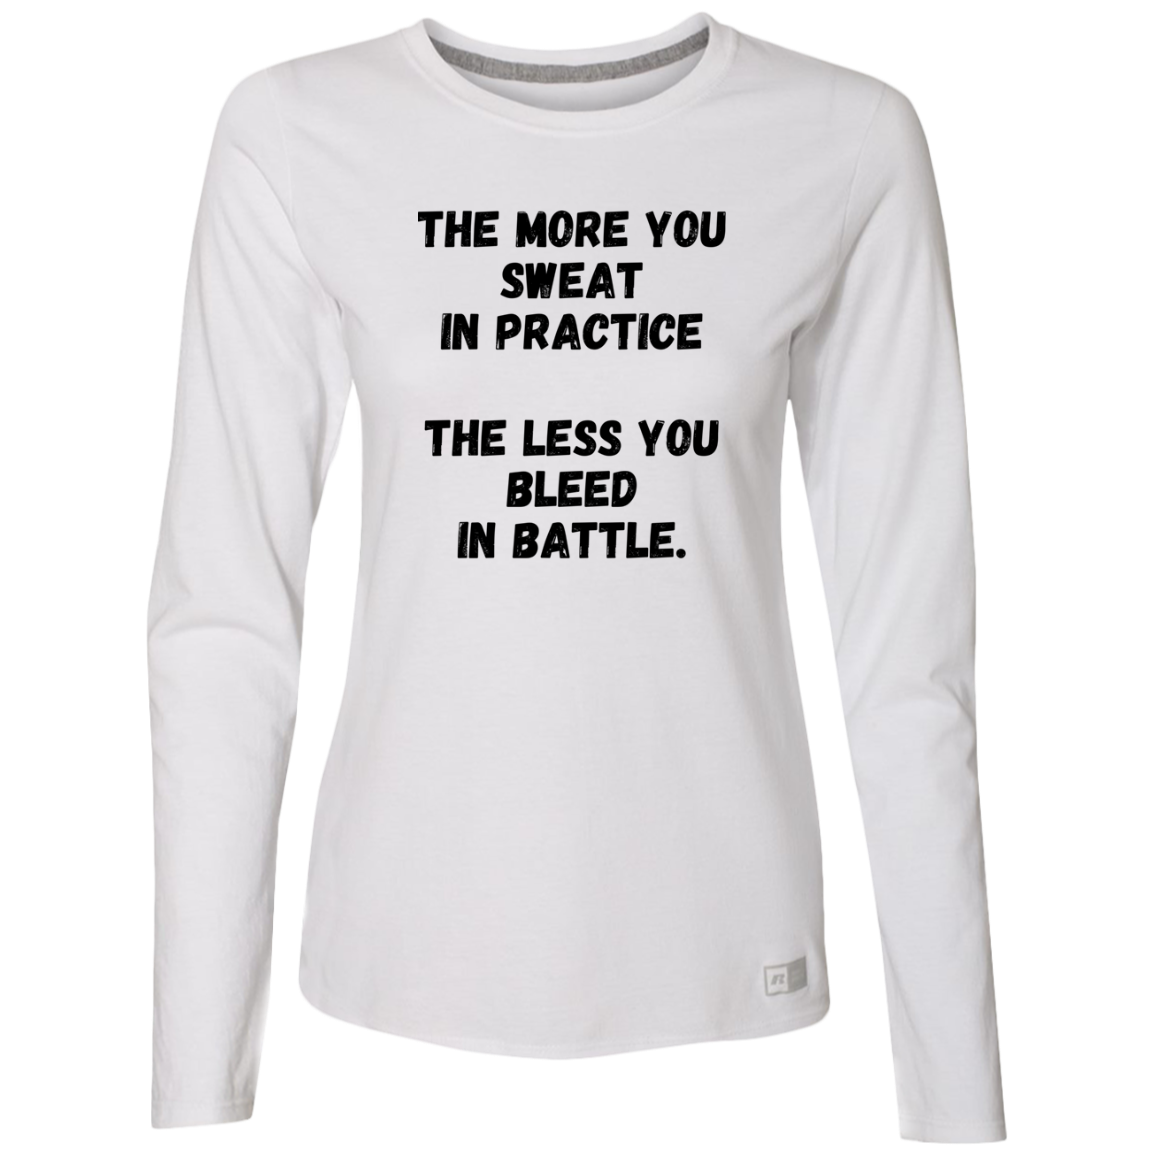 The More You Sweat In Practice, The Less You Bleed In Battle - Women's, Ladies’ Essential Dri-Power Long Sleeve Tee